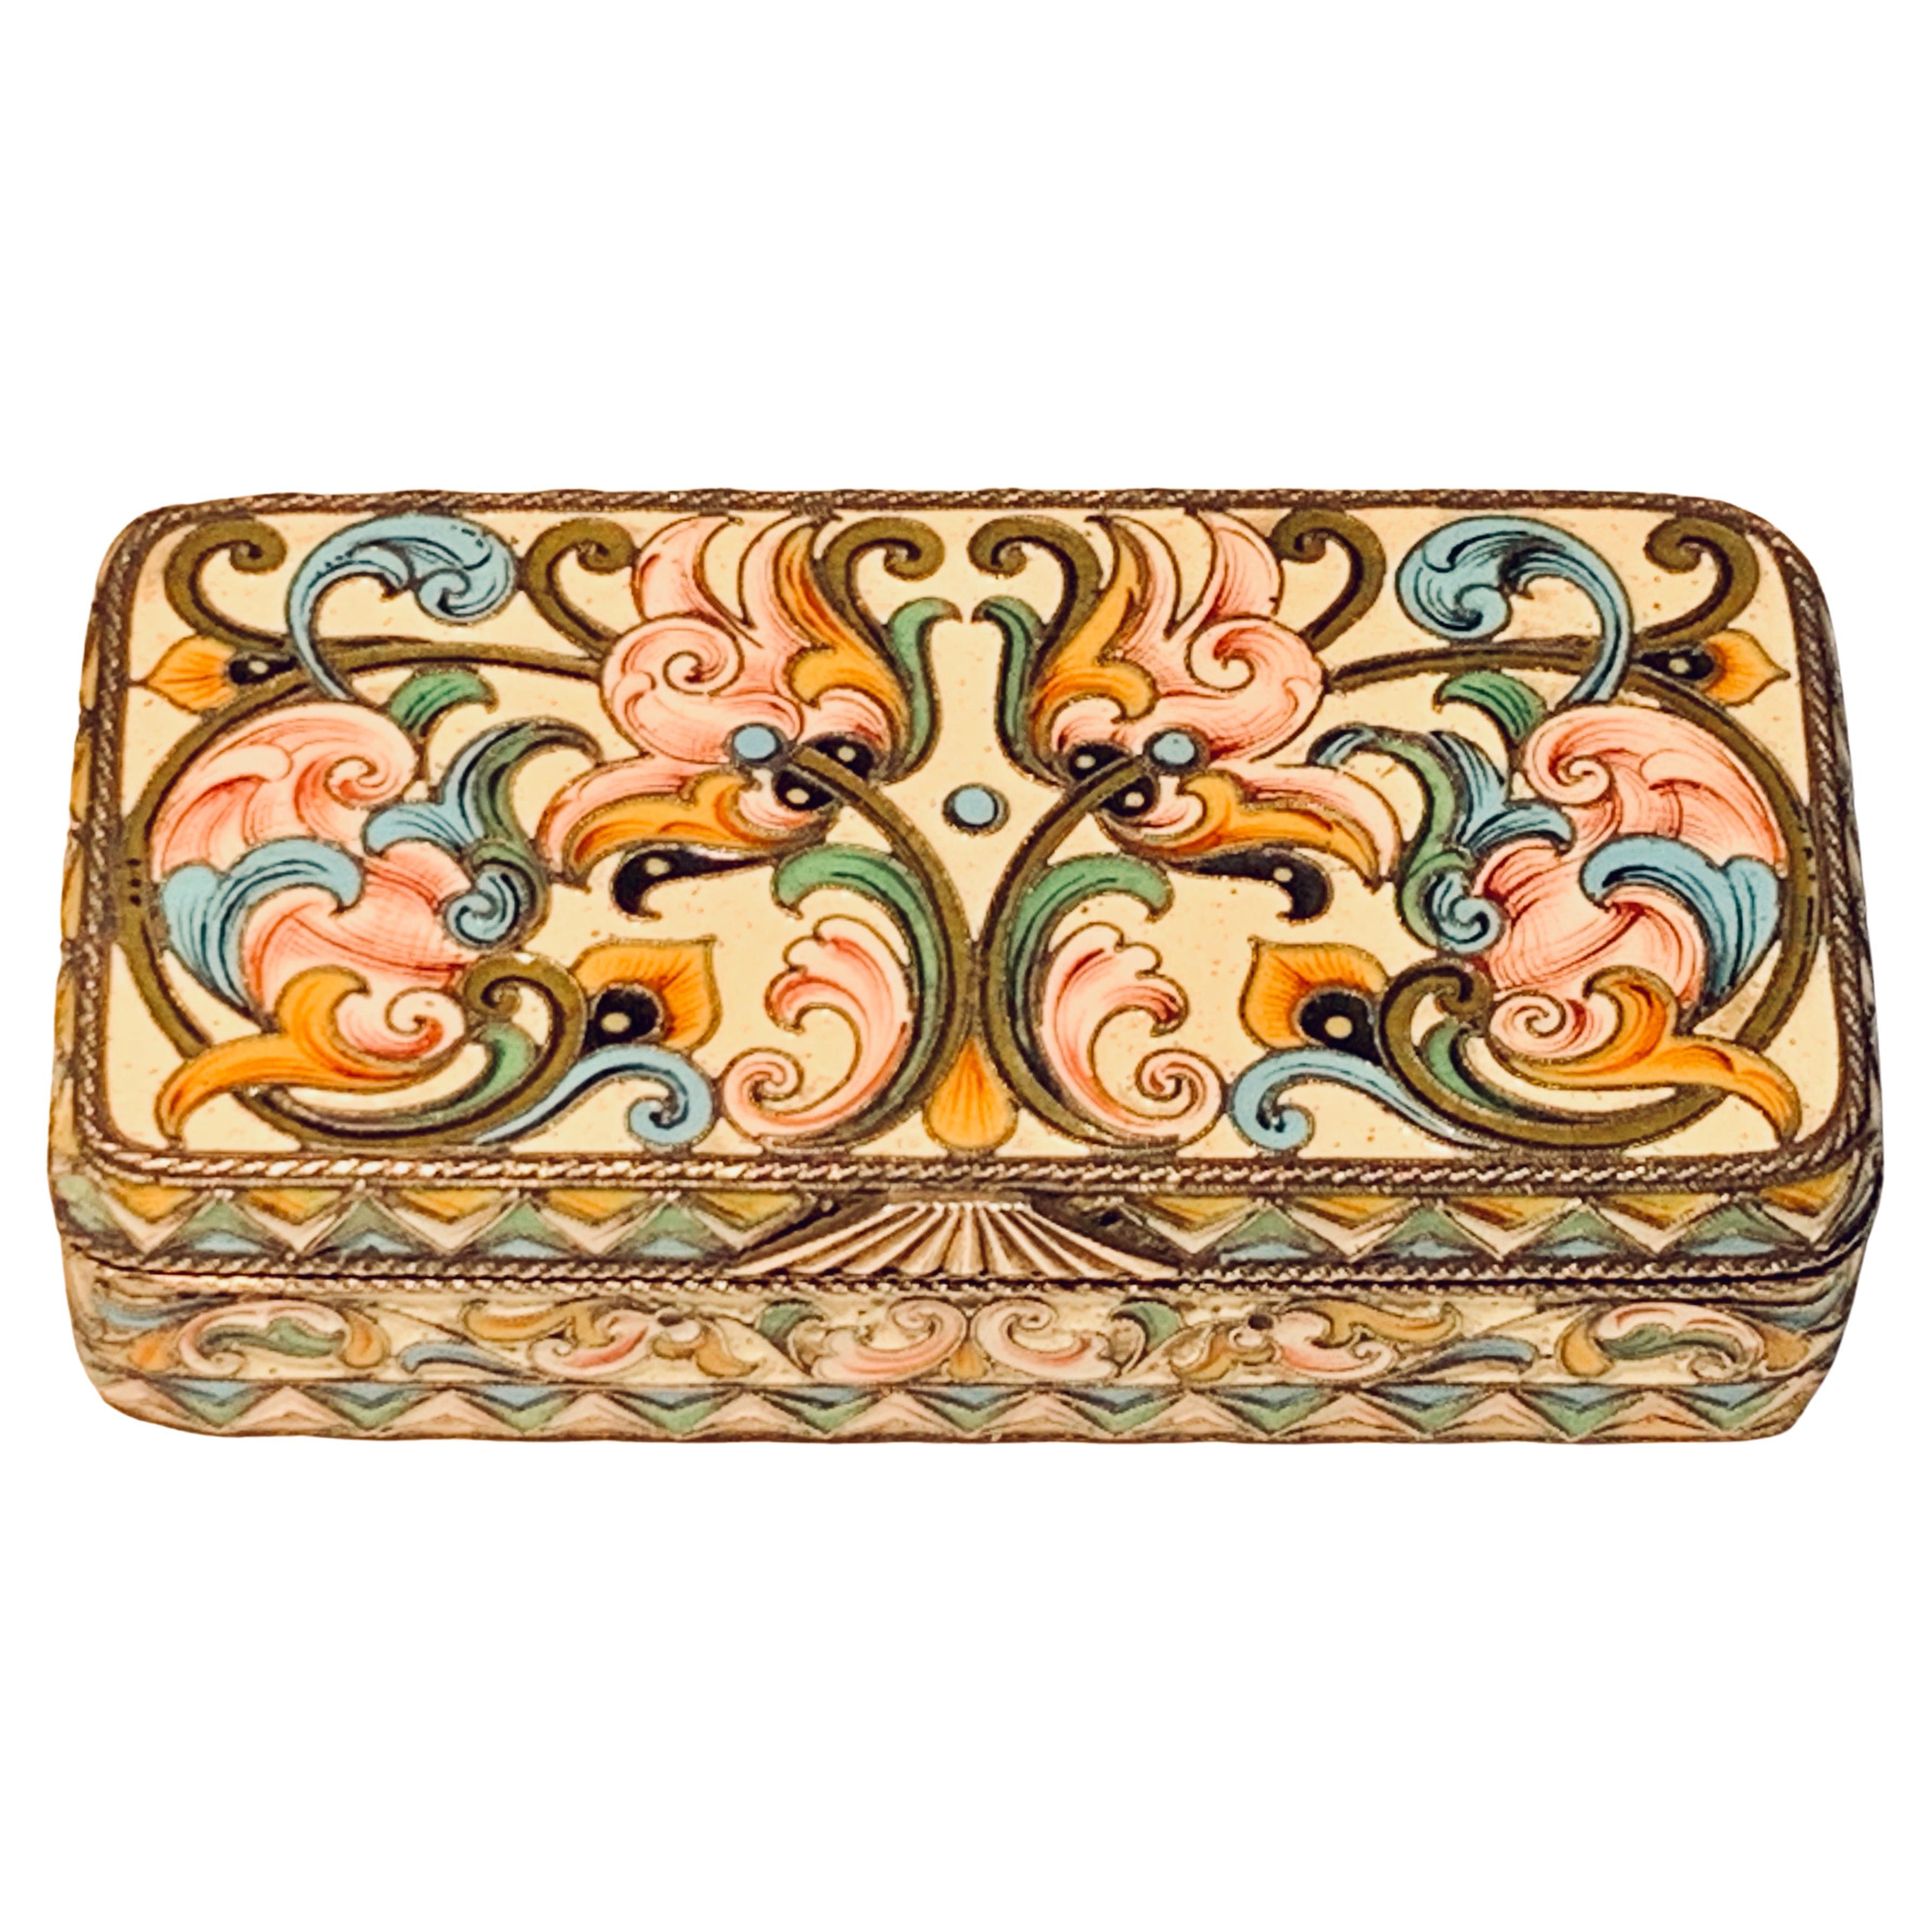 Khlebnikov Russian Silver-Gilt and Shaded Enamel Box / Case For Sale